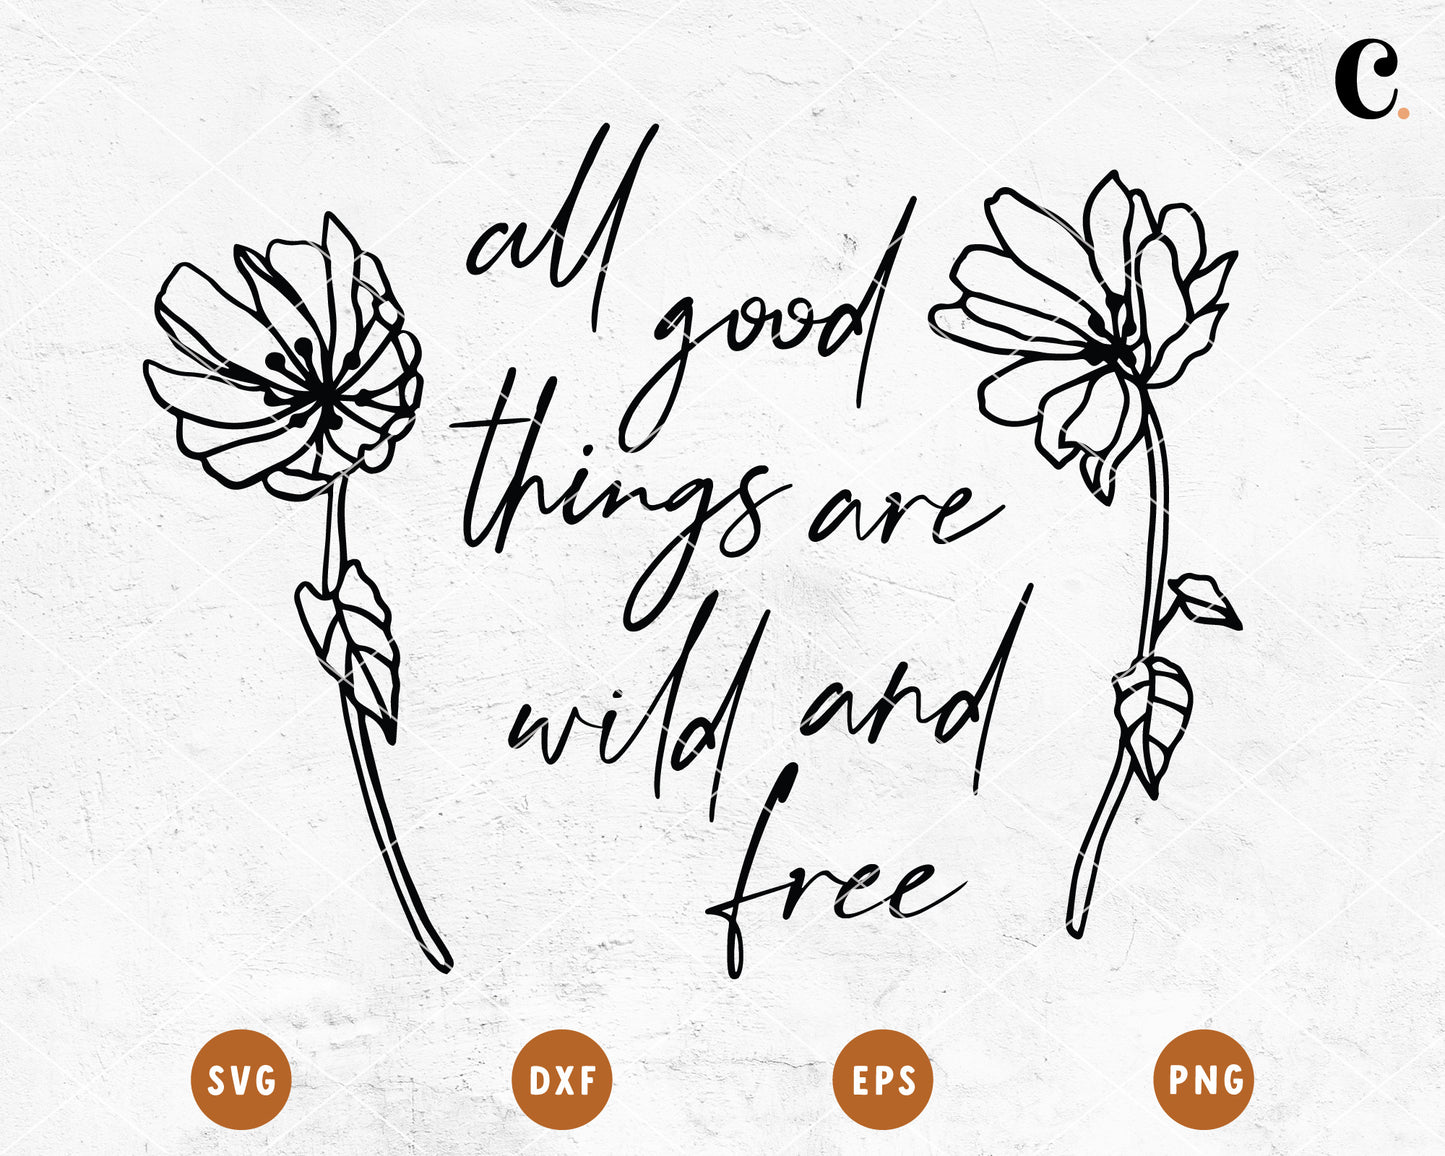 Wildflower SVG | All Good Things Are Wild & Free SVG Cut File for Cricut, Cameo Silhouette